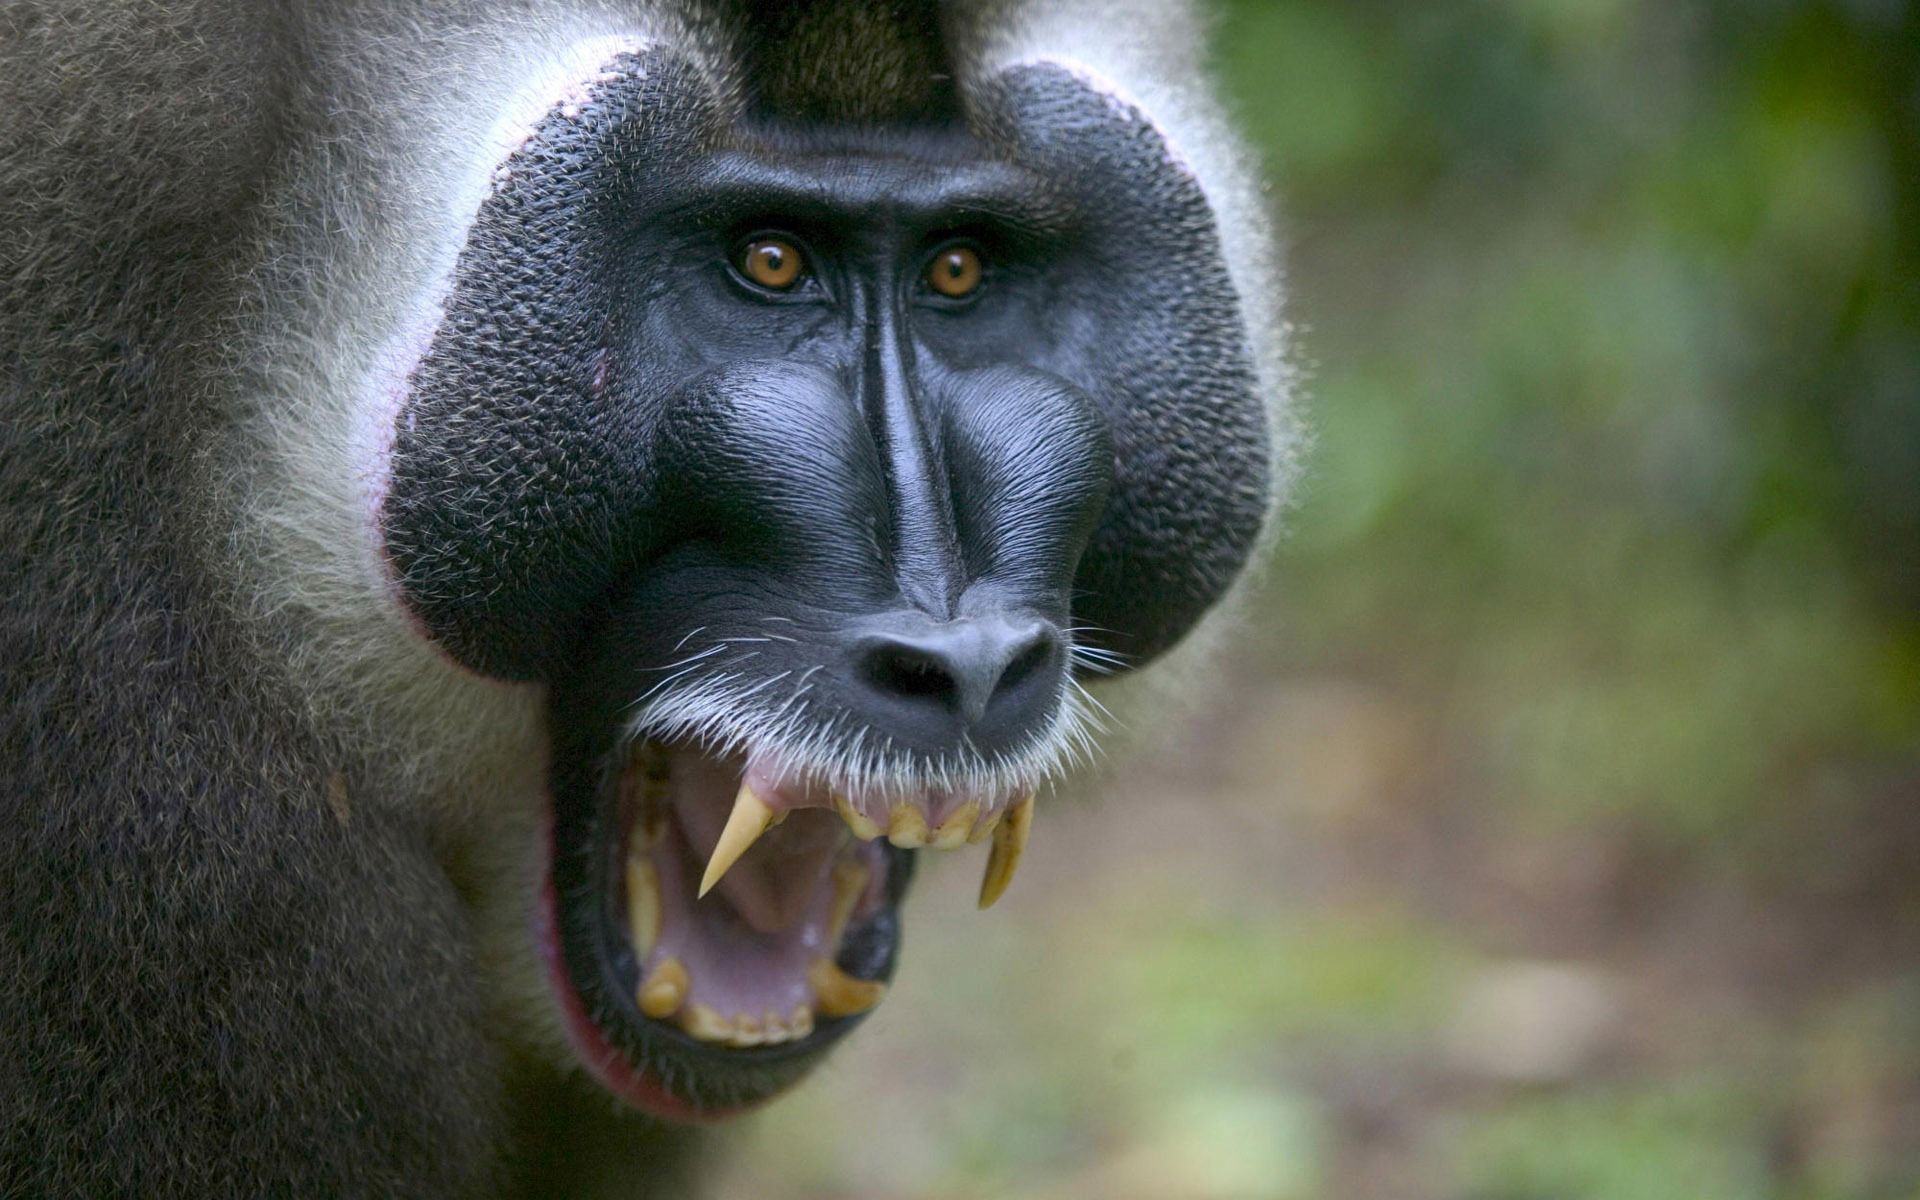 animals, aggression, muzzle, monkey, fangs cellphone